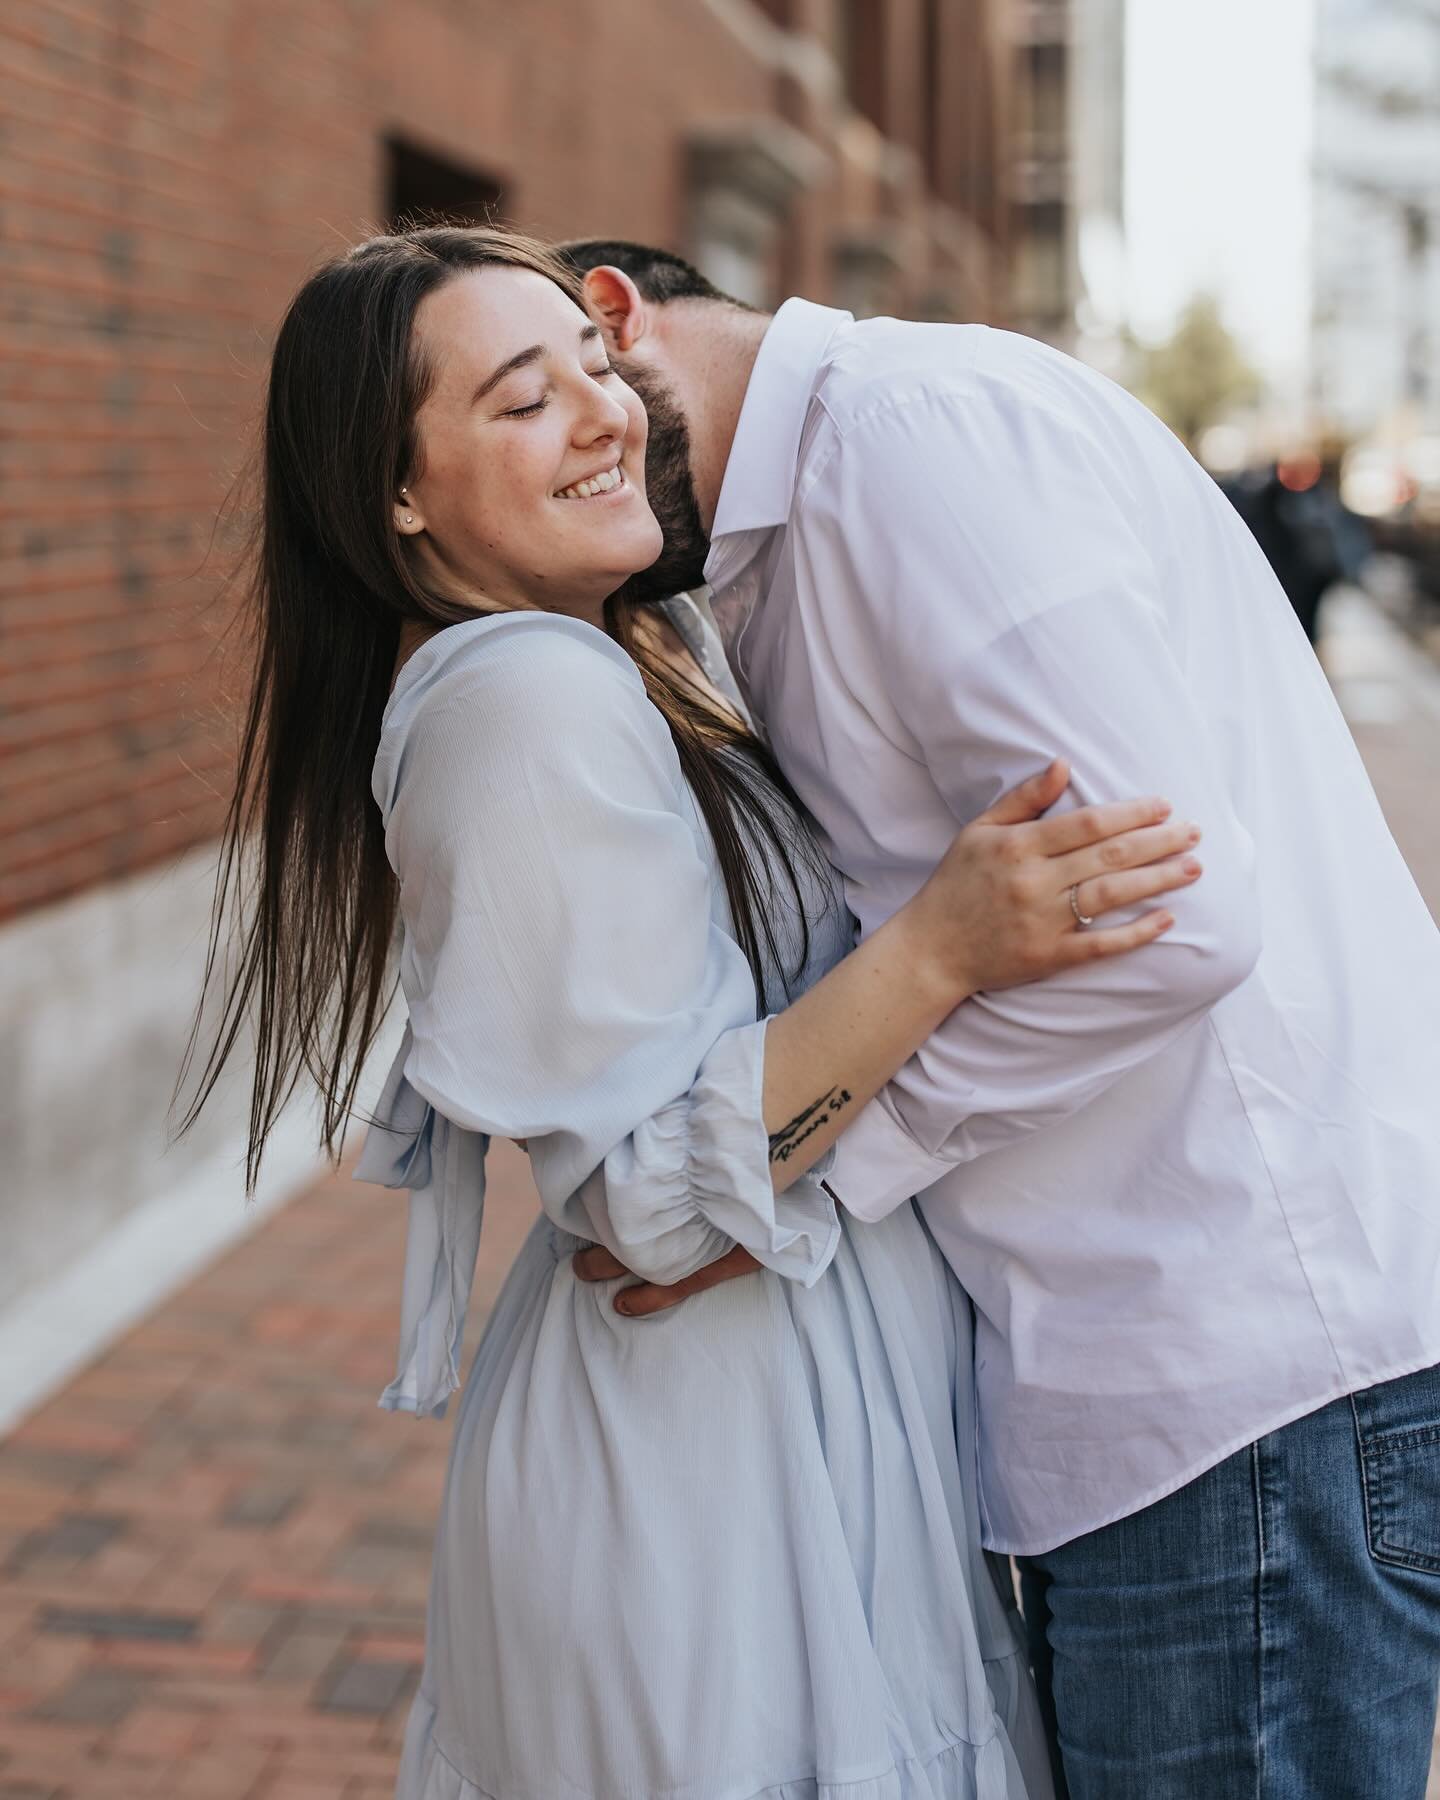 a dreamy morning in the seaport with emily &amp; corey 🏙️

these two were visiting boston and reached out to capture some couples photos in the city where they first started dated! i had so much fun learning about their journey as a couple and captu